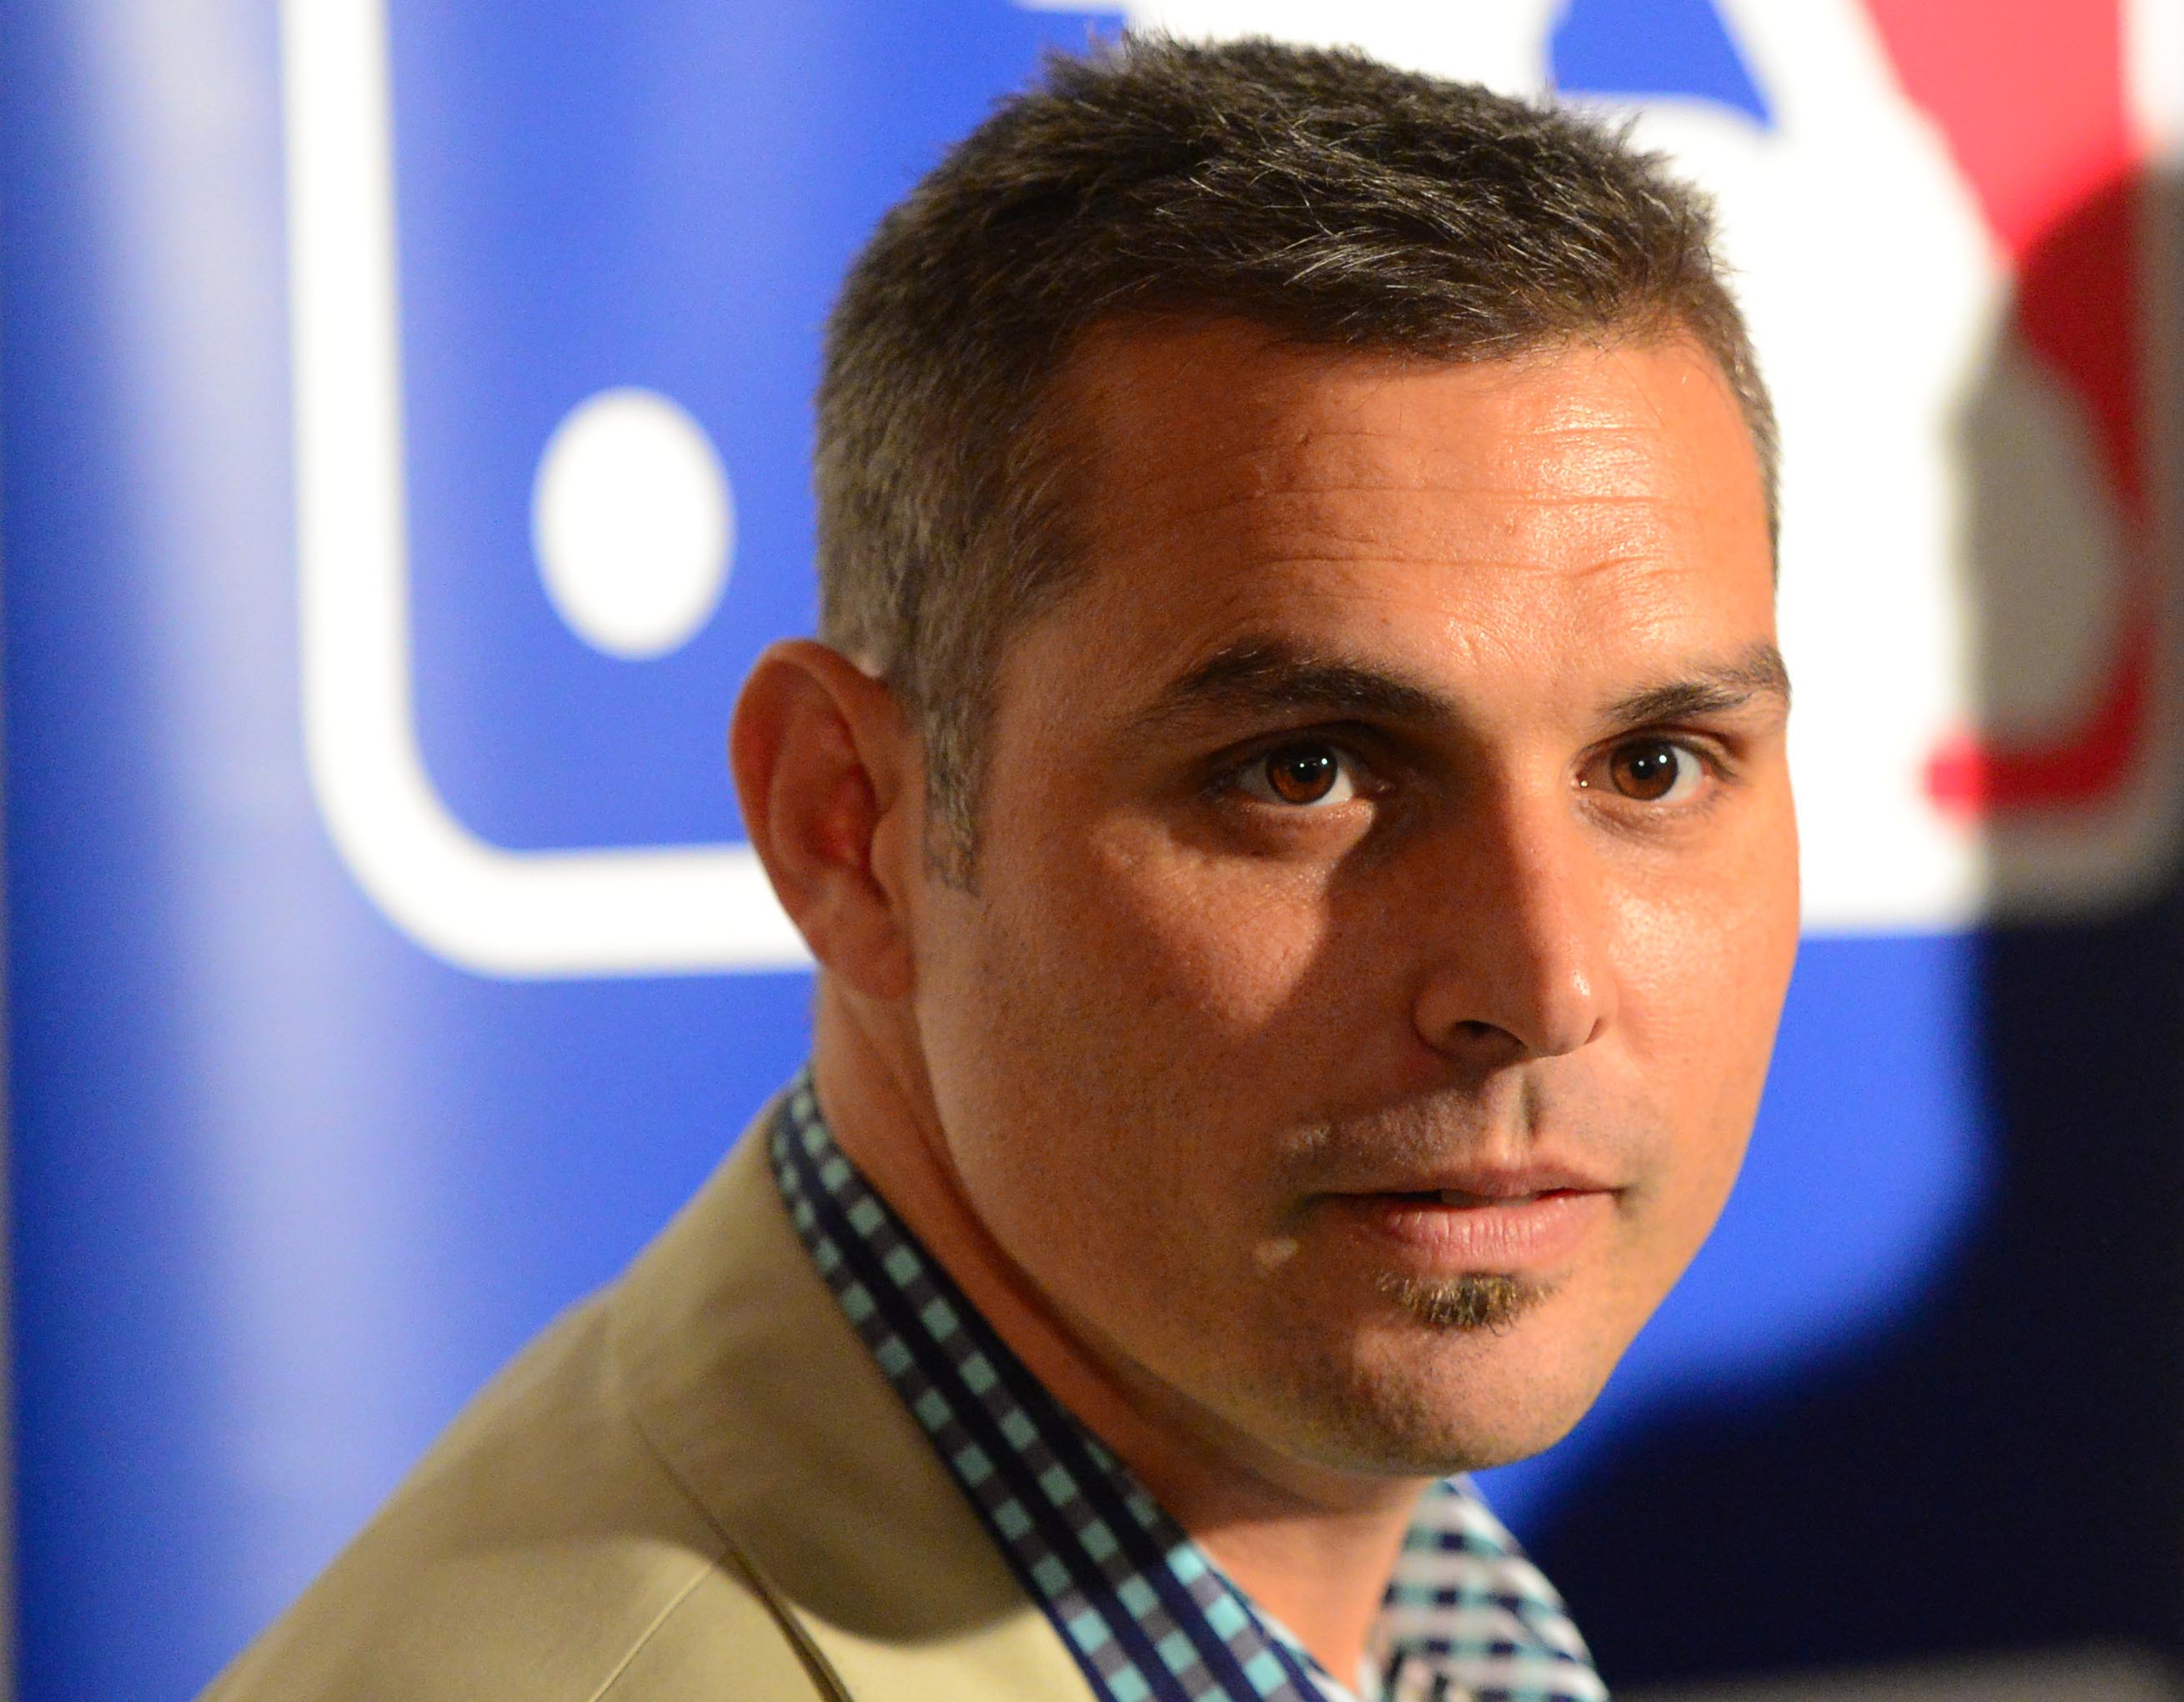 Kevin Cash with Rays at Winter Meetings